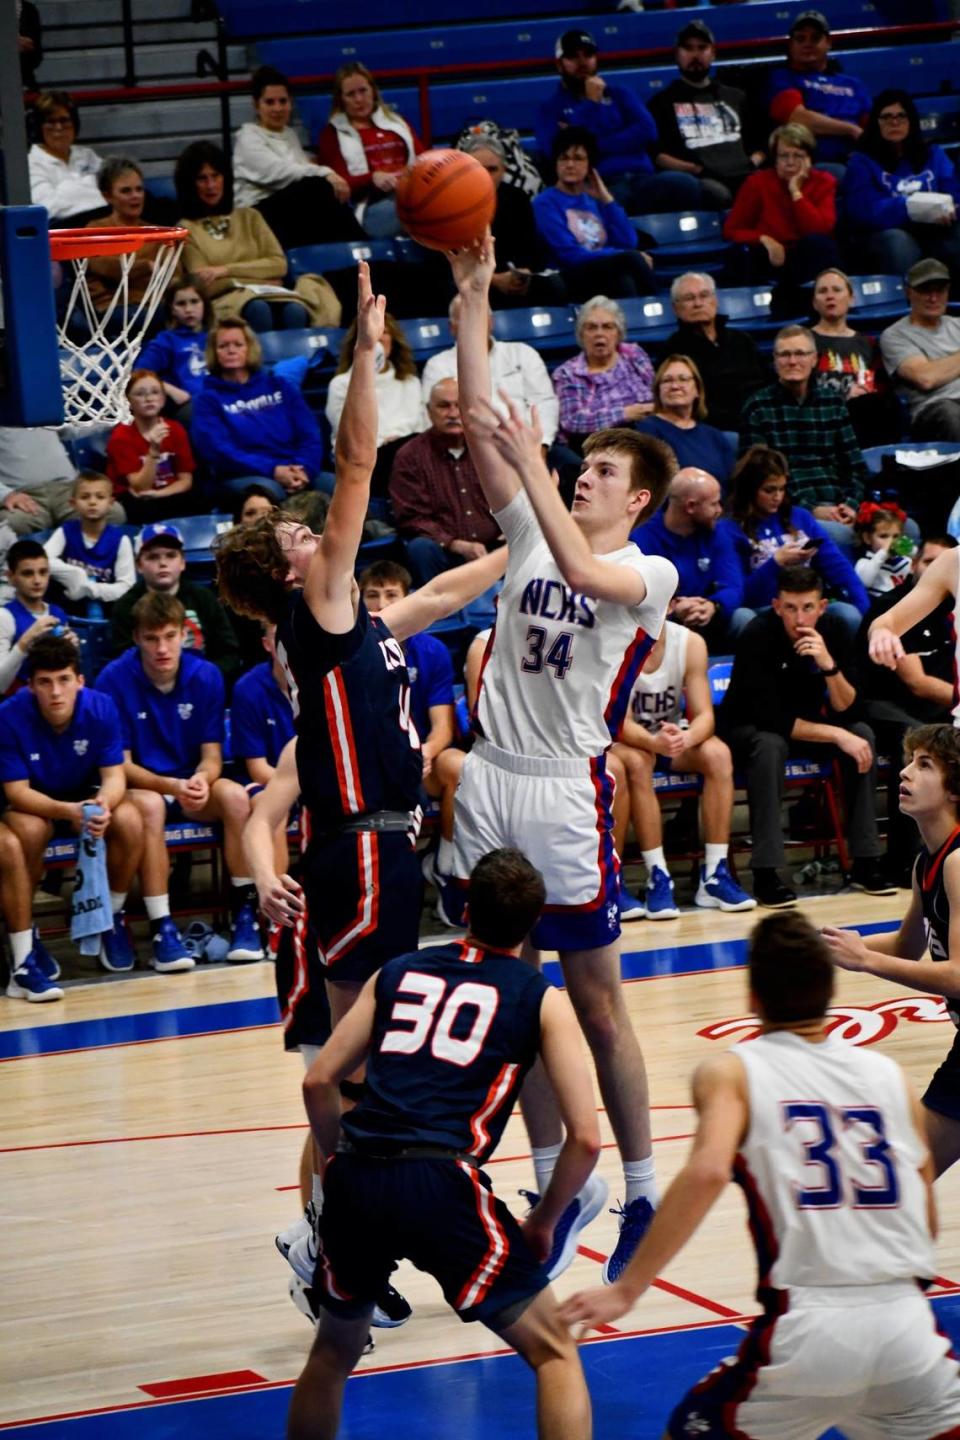 Nashville High School’s Bennett Briles goes up for a shot during a game this season. For his outstanding season, readers of bnd.com selected Briles as the Belleville News-Democrat’s Boys Basketball Player of the Year for 2022-23.